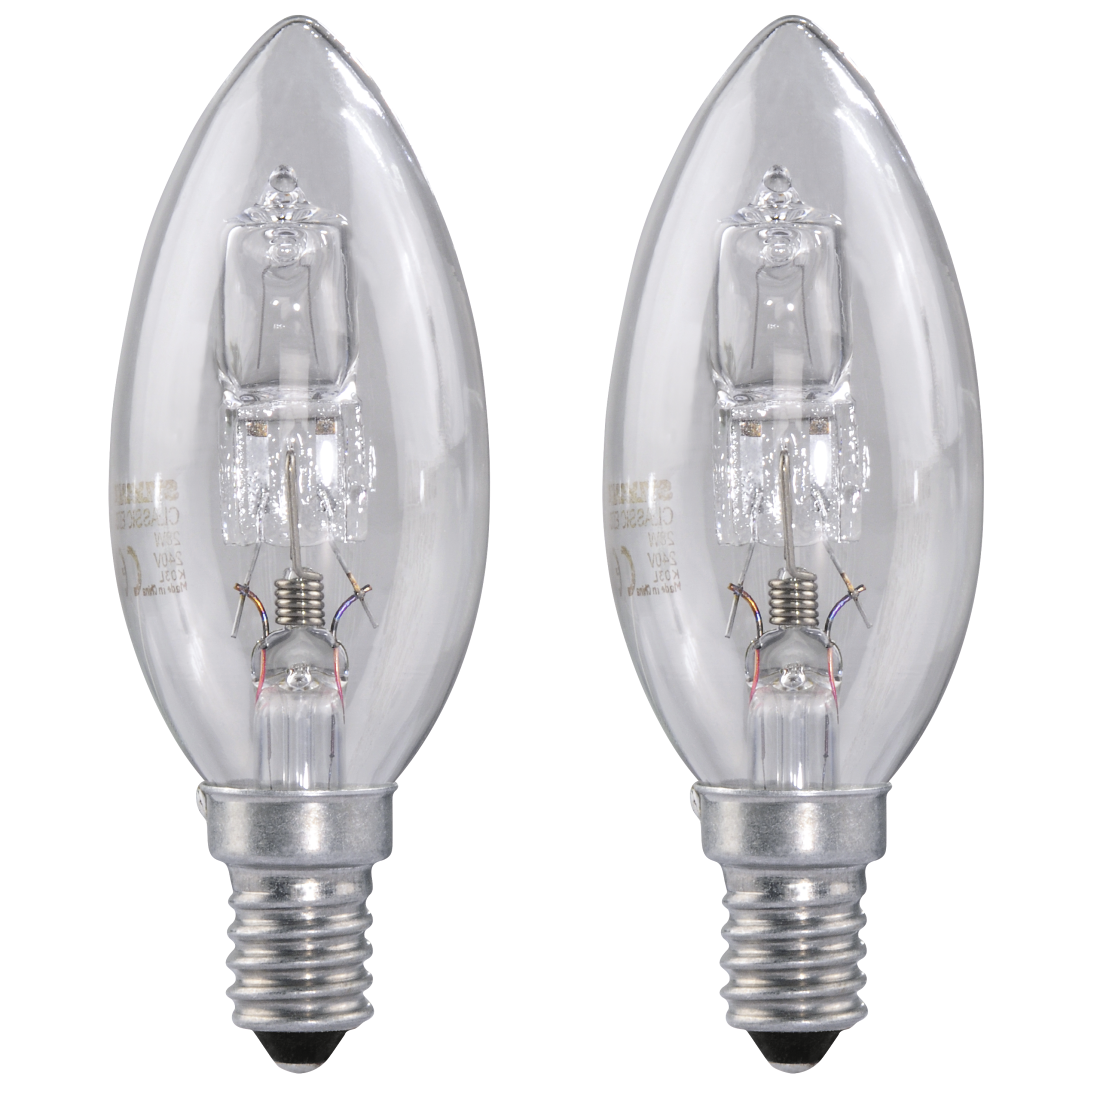 abx High-Res Image - Xavax, Halogen Candle Bulb, E14, 46W, warm white, 2 pieces